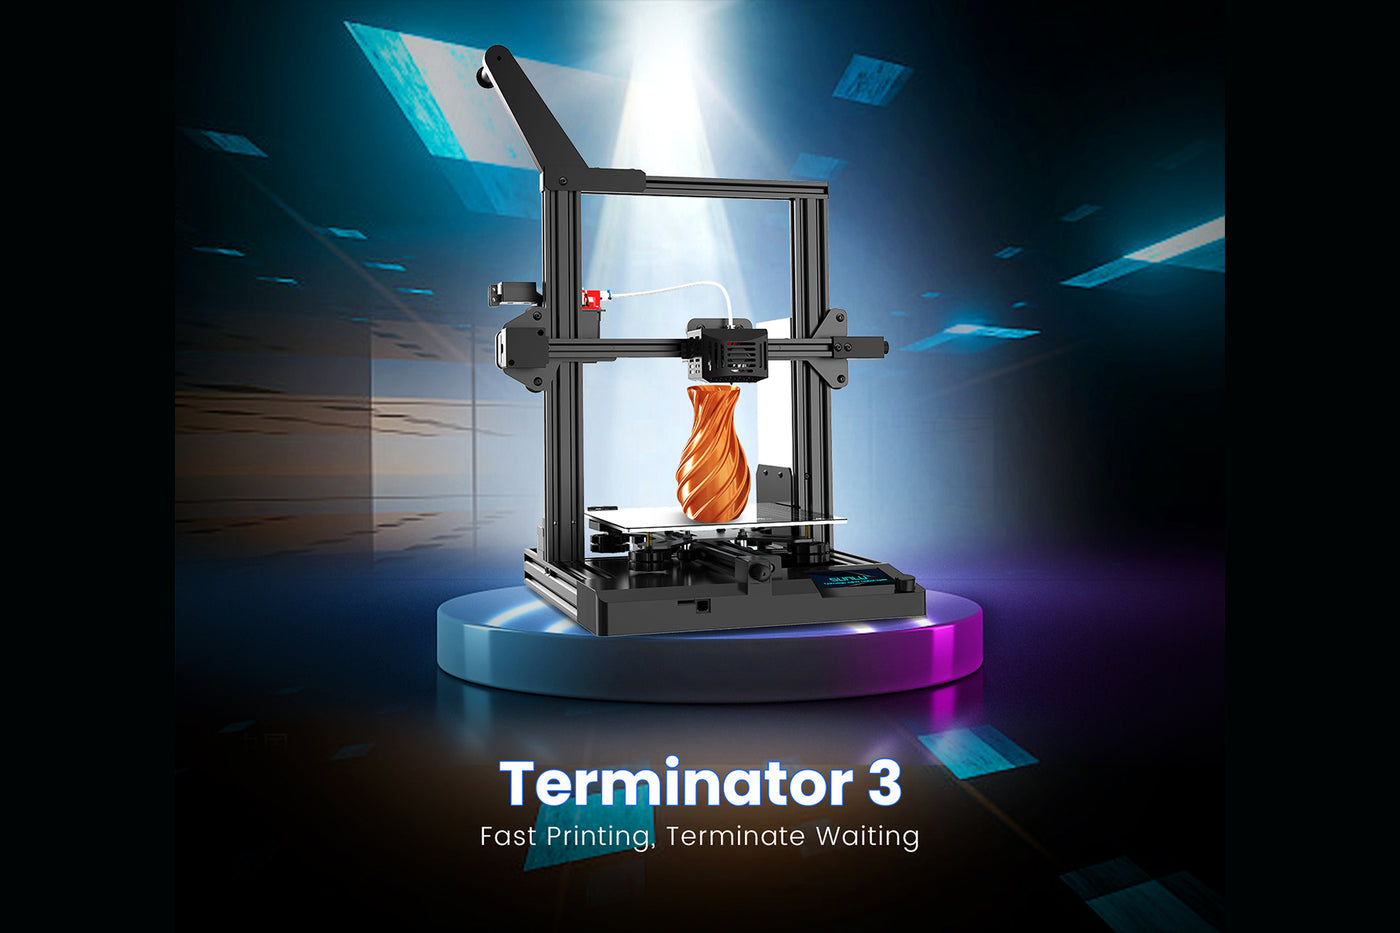 250mm/s Fast Printing 3D Printer - SUNLU Terminator-3 Officially Released 